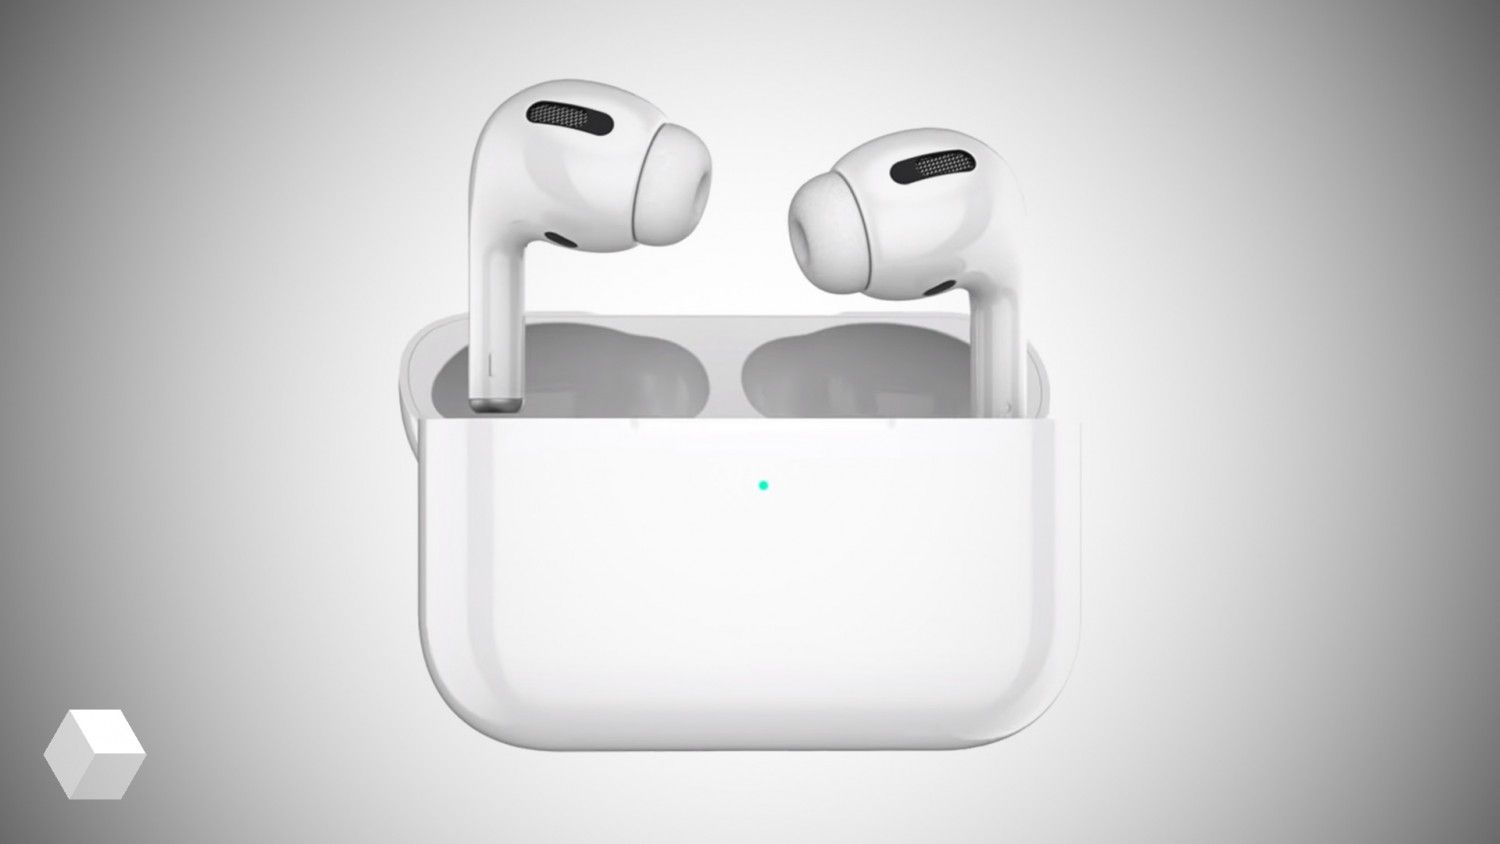 Airpods 2 huilian. Беспроводная гарнитура Apple AIRPODS Pro 2. Наушники Apple AIRPODS 3rd Generation. Apple AIRPODS Pro 2022. Apple наушники беспроводные AIRPODS Pro 2022.